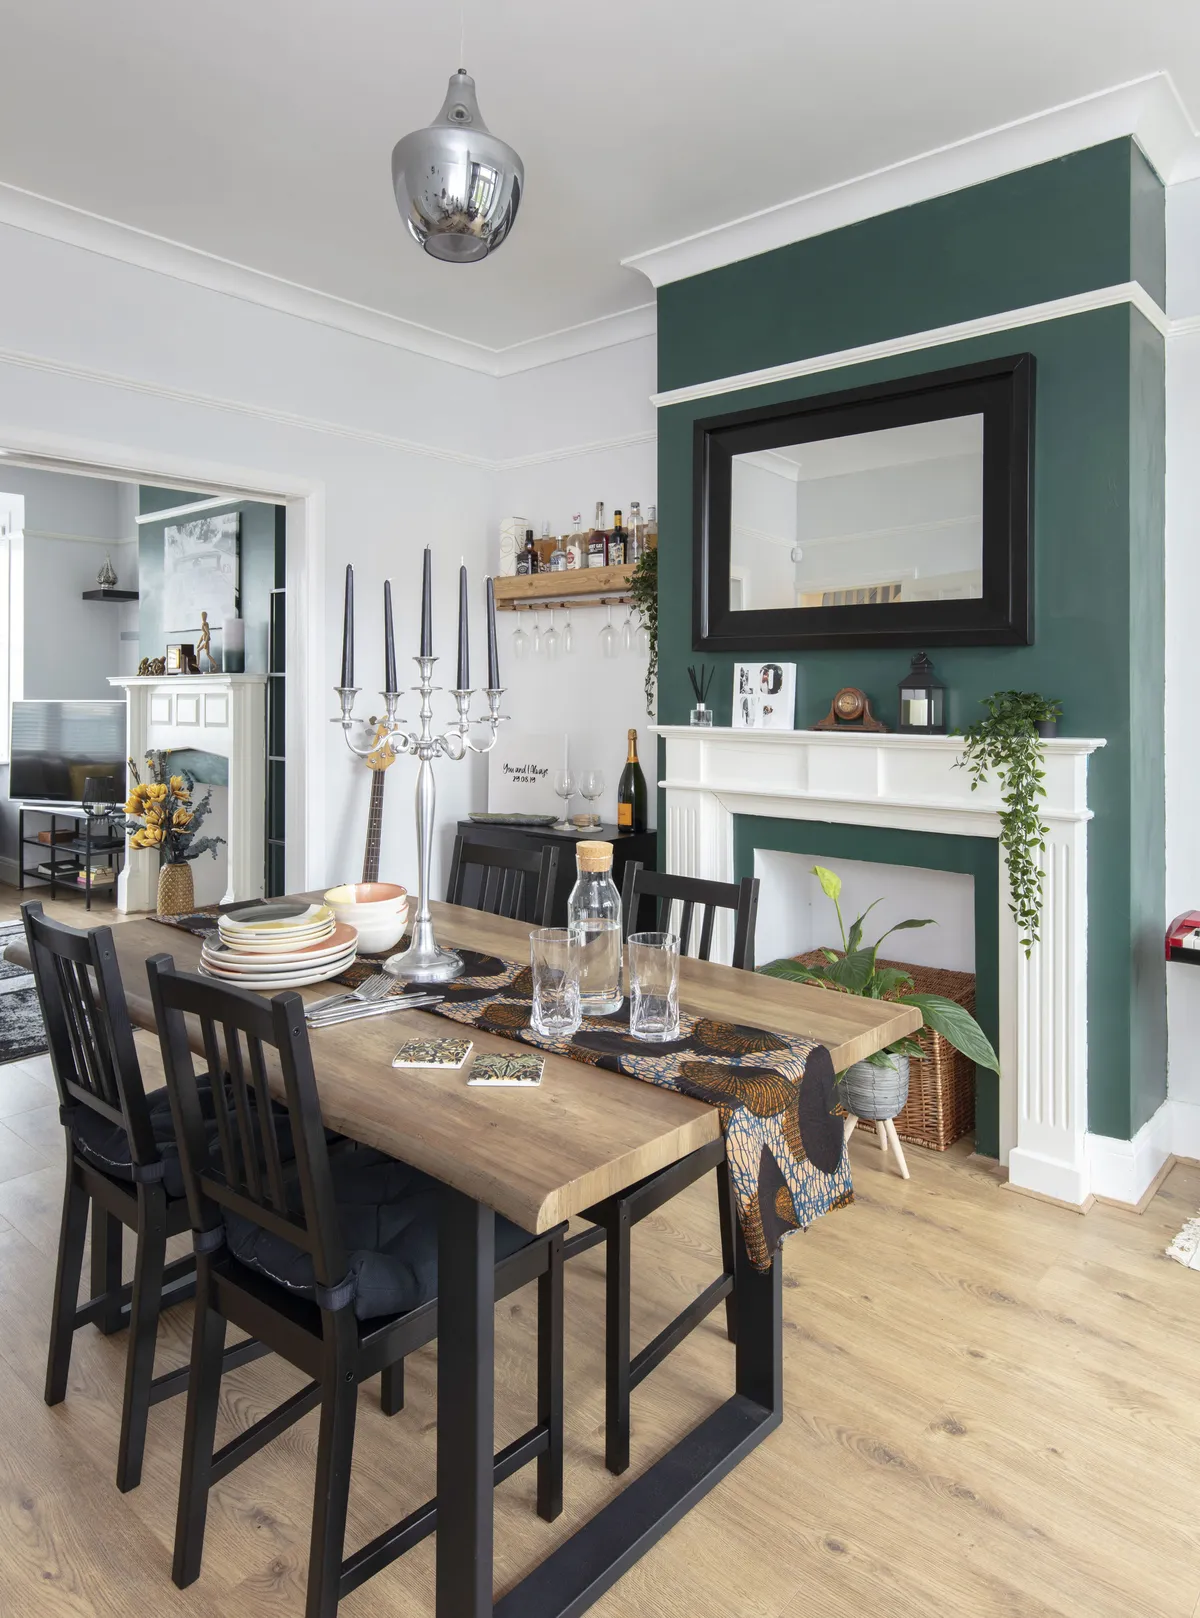 Diandra had unexpected good luck with her dining table – as the company made a mistake with delivery, they gave it to her for free! ‘I love the rustic wooden tabletop and black metal legs, and I styled it with black wooden chairs from IKEA,’ she says